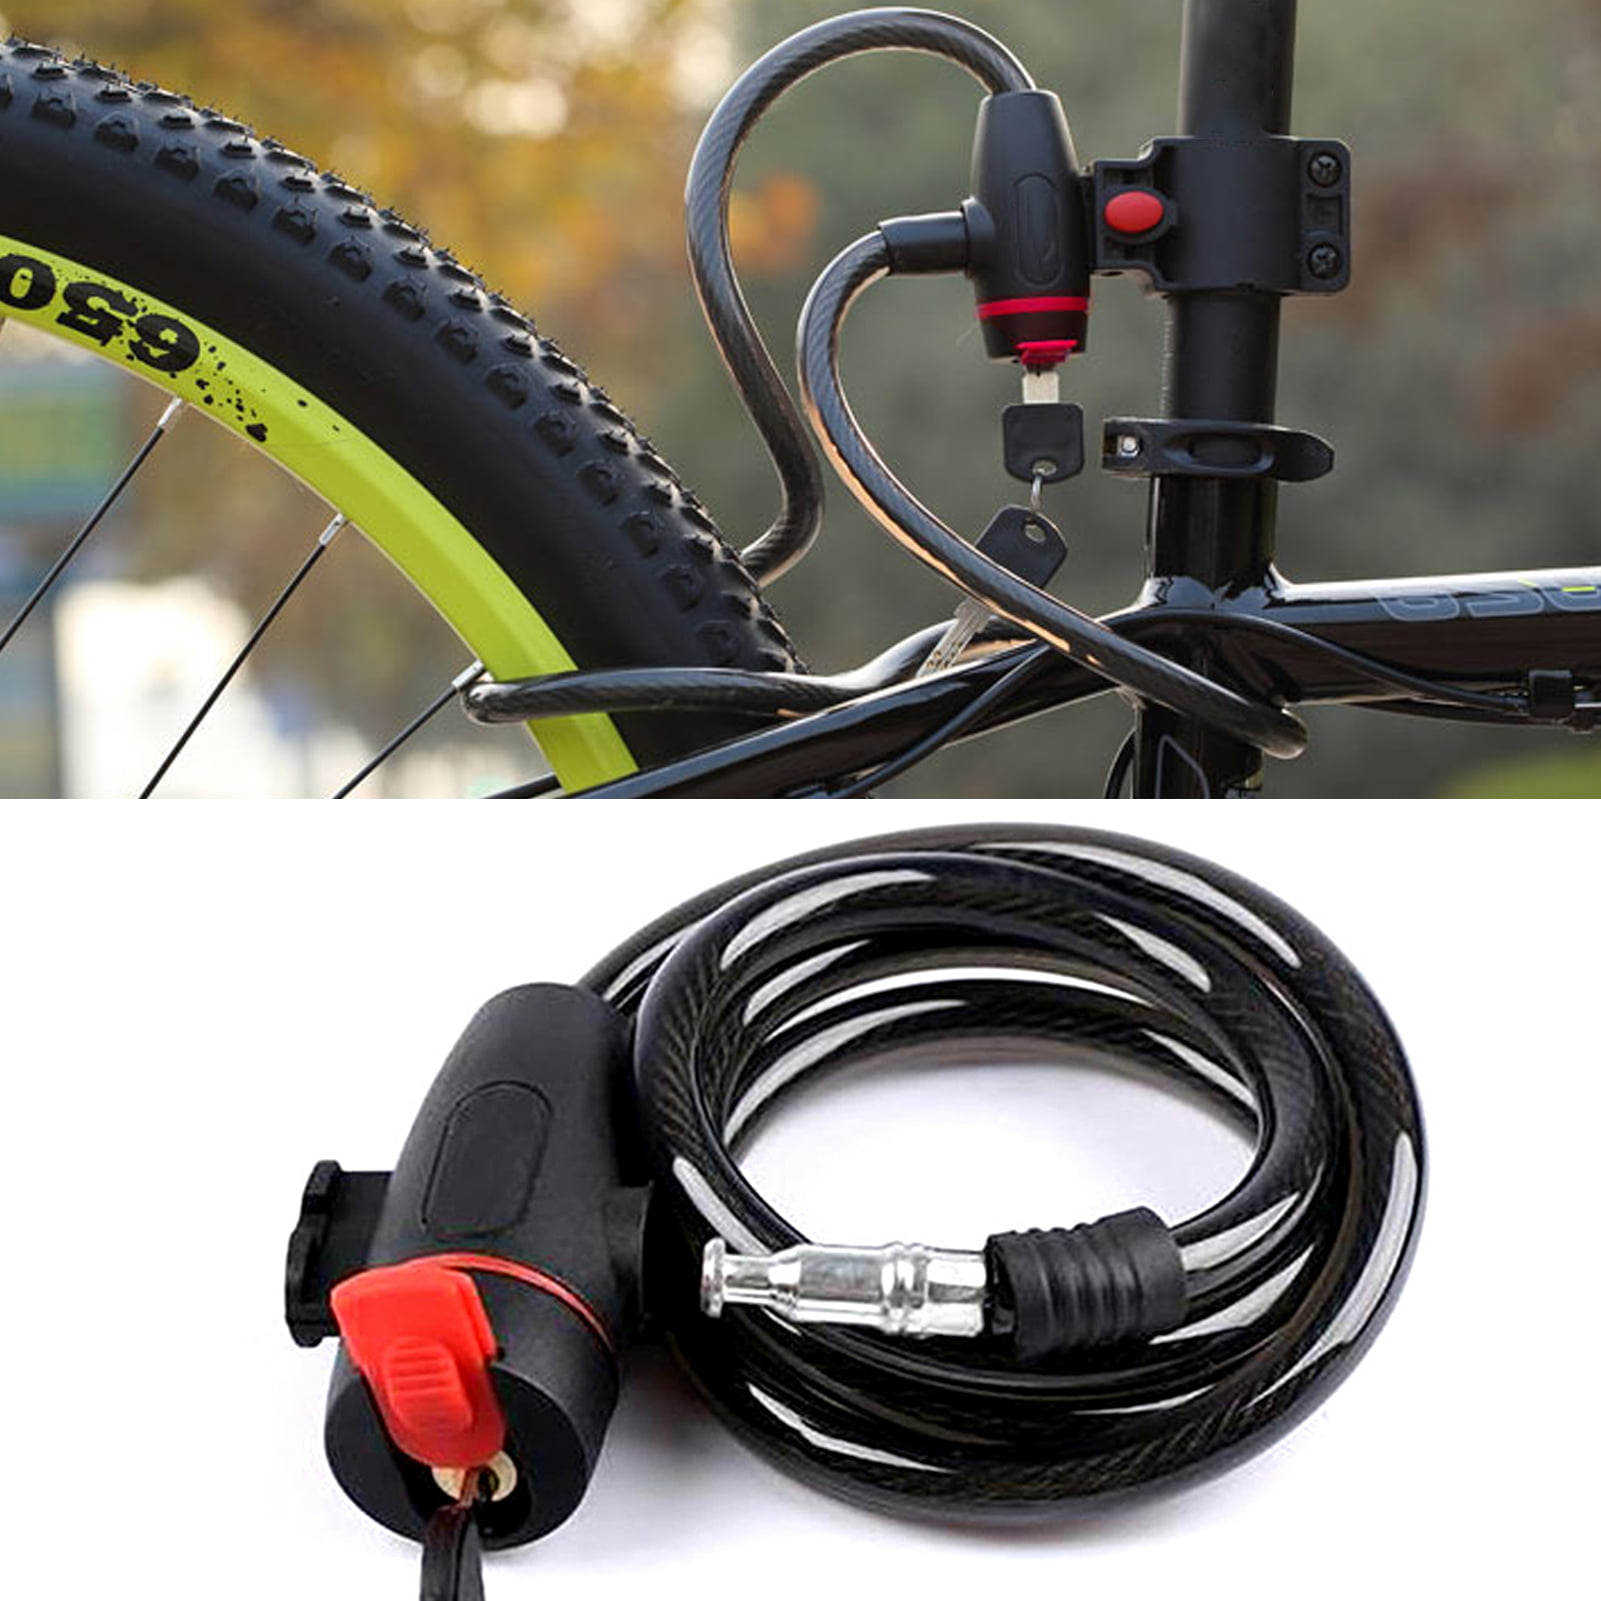 12mm Bike Security Cable Lock Steel Coiled Cable Lock with 2 Keys 4ft/1.2m Diyife Bike Lock, Heavy Duty Bicycle Lock with Mounting Bracket for Bike Motorcycle Scooter Skateboard Stroller Outdoor 